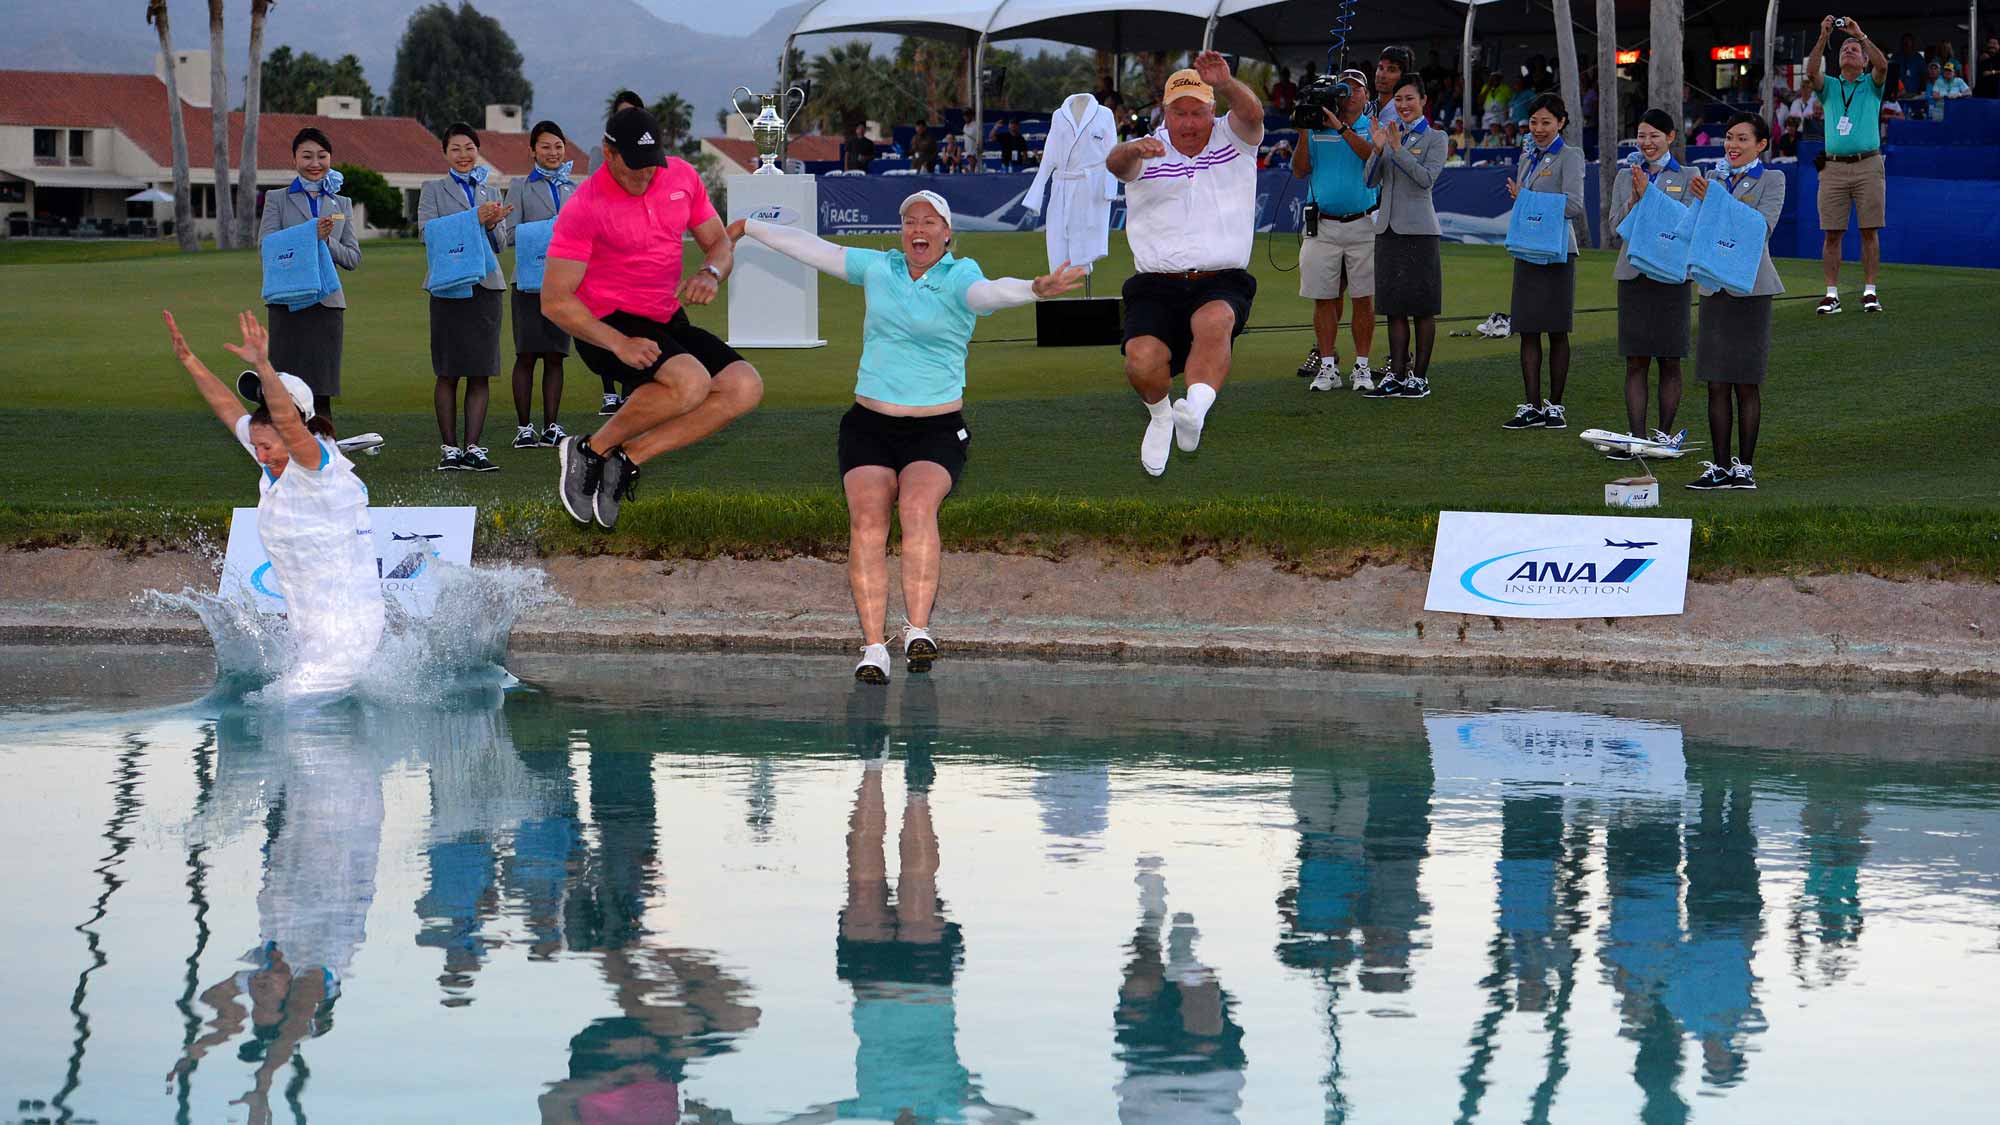 Brittany Lincicome jumps in the water with from left to right, her caddie Missy Pederson, her fiance Dewald Gouws and her father Tom Lincicome after winning the ANA Inspiration